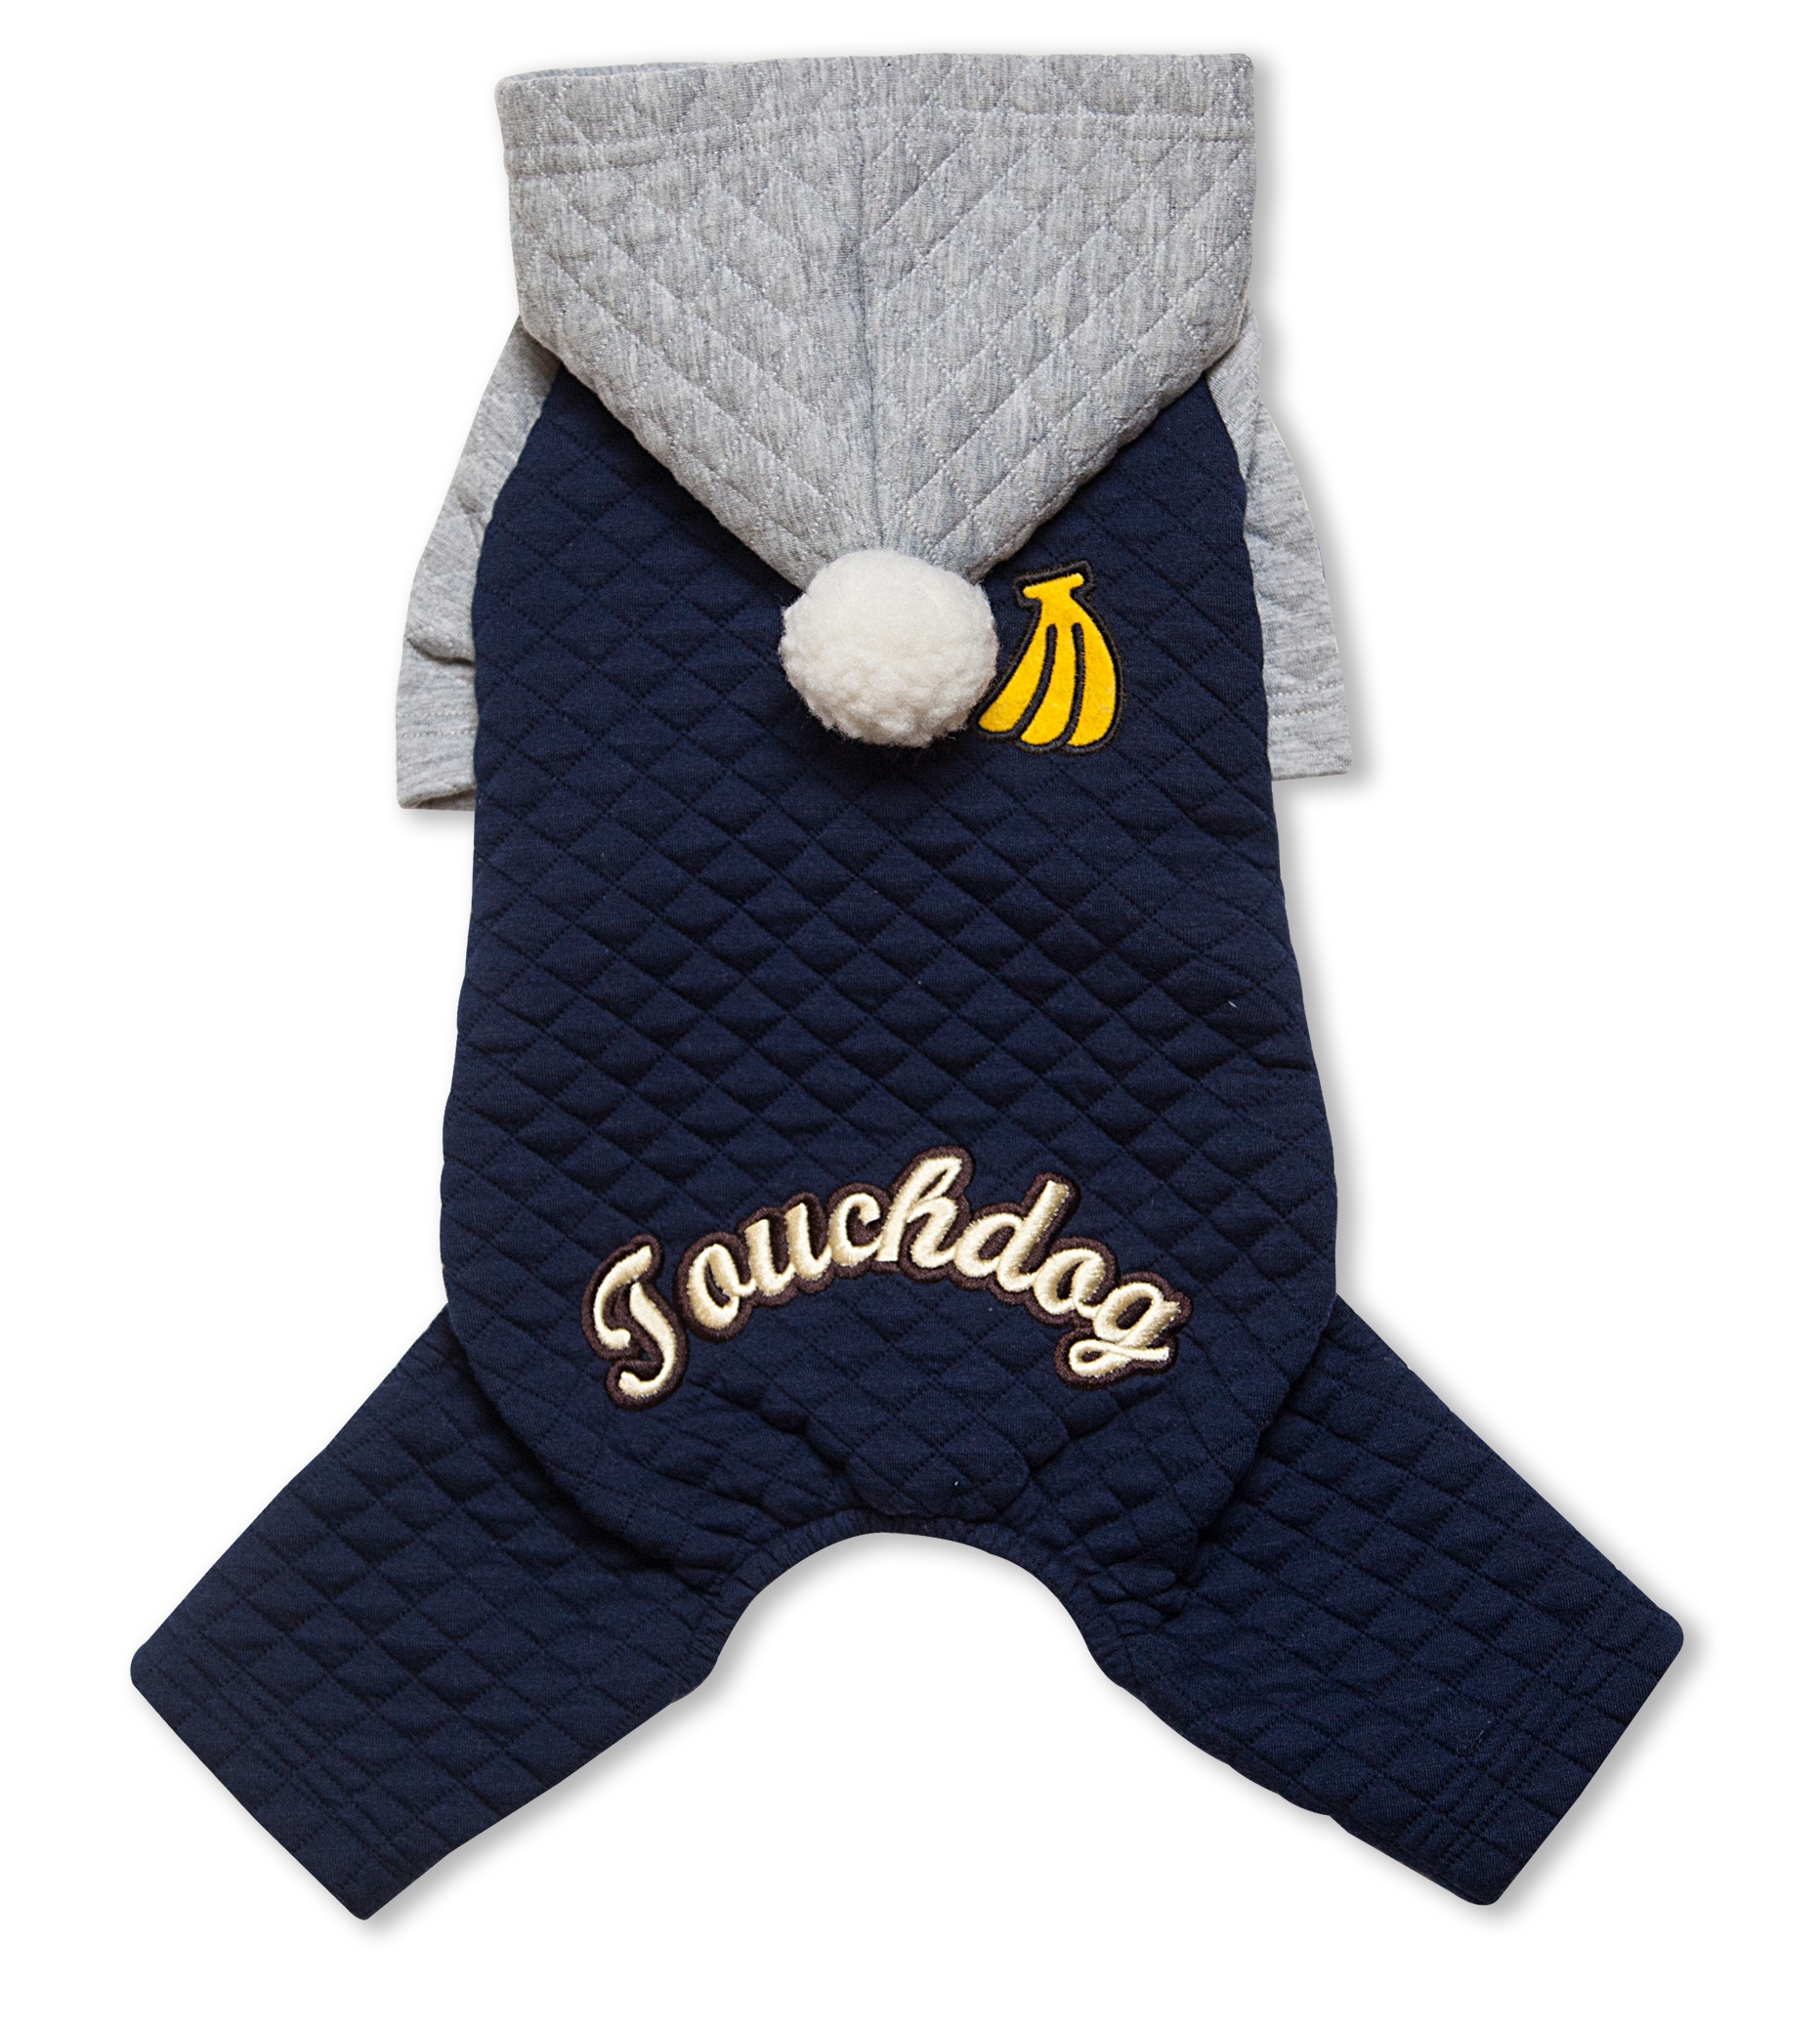 Touchdog Fashion Designer Full Body Quilted Pet Dog Hooded Sweater - Unisex, Medium, Navy/Grey, Polyester - Quilted Pom-Pom Hood, Designer Embroidery -  HD7NVMD